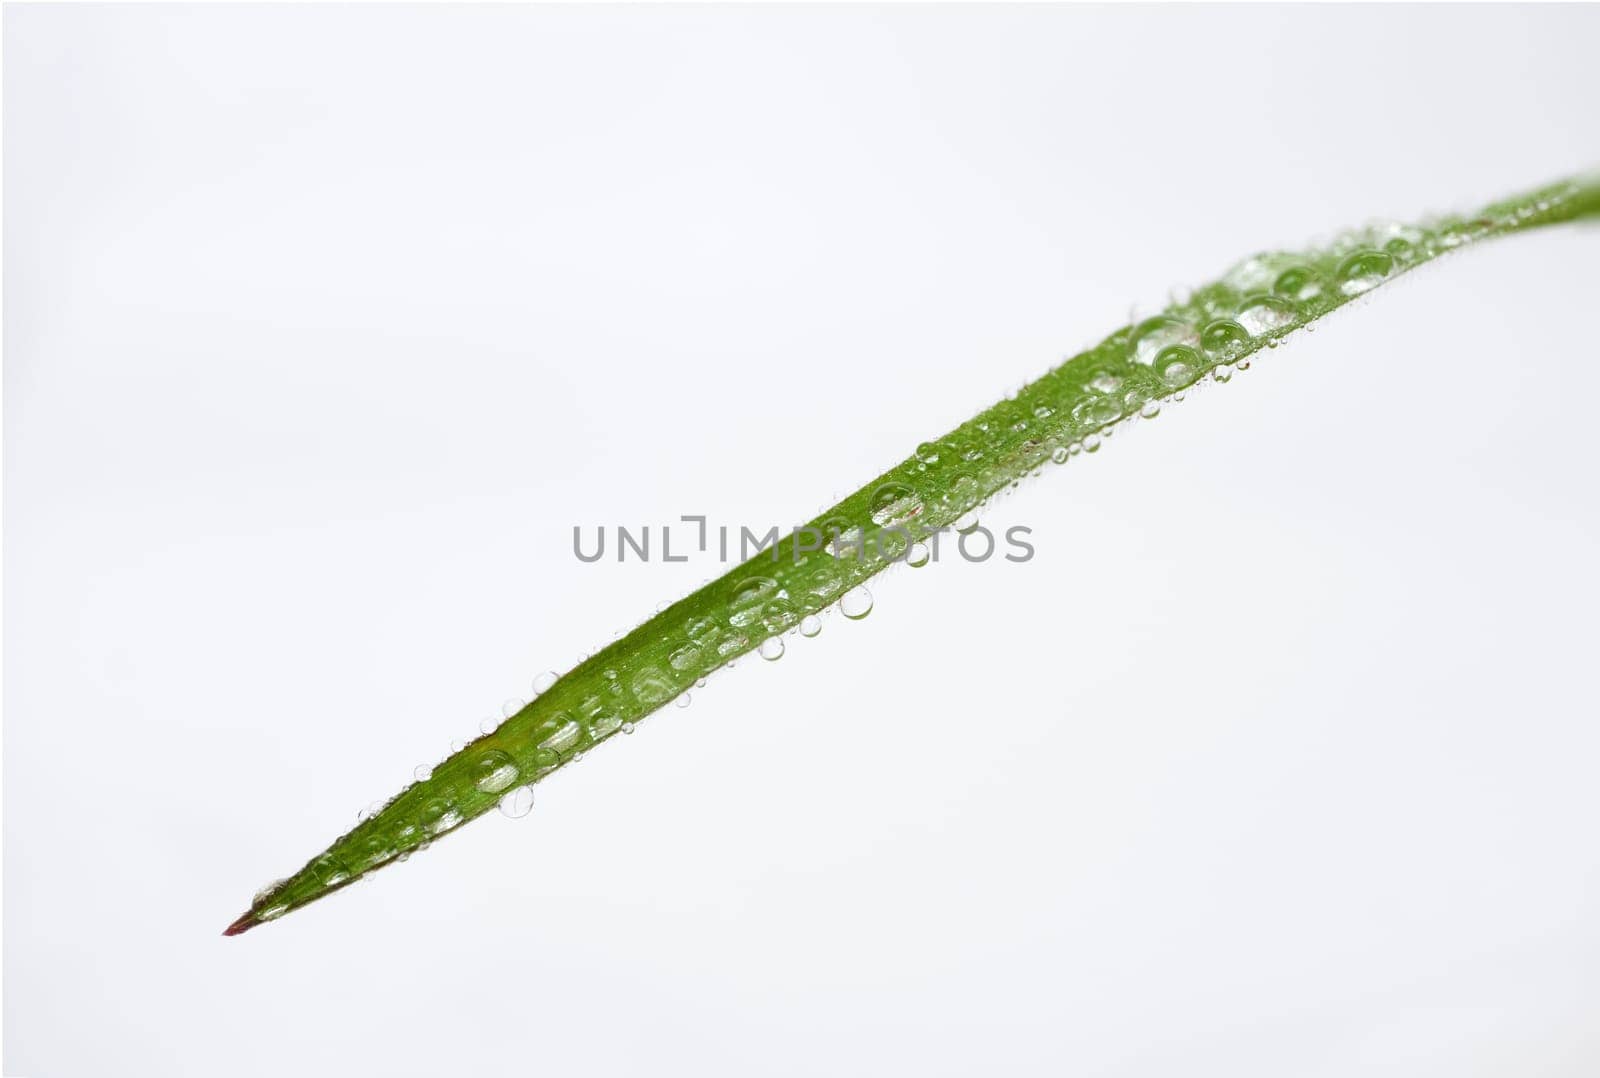 closeup of a green leaf with dewdrops isolated on a white background